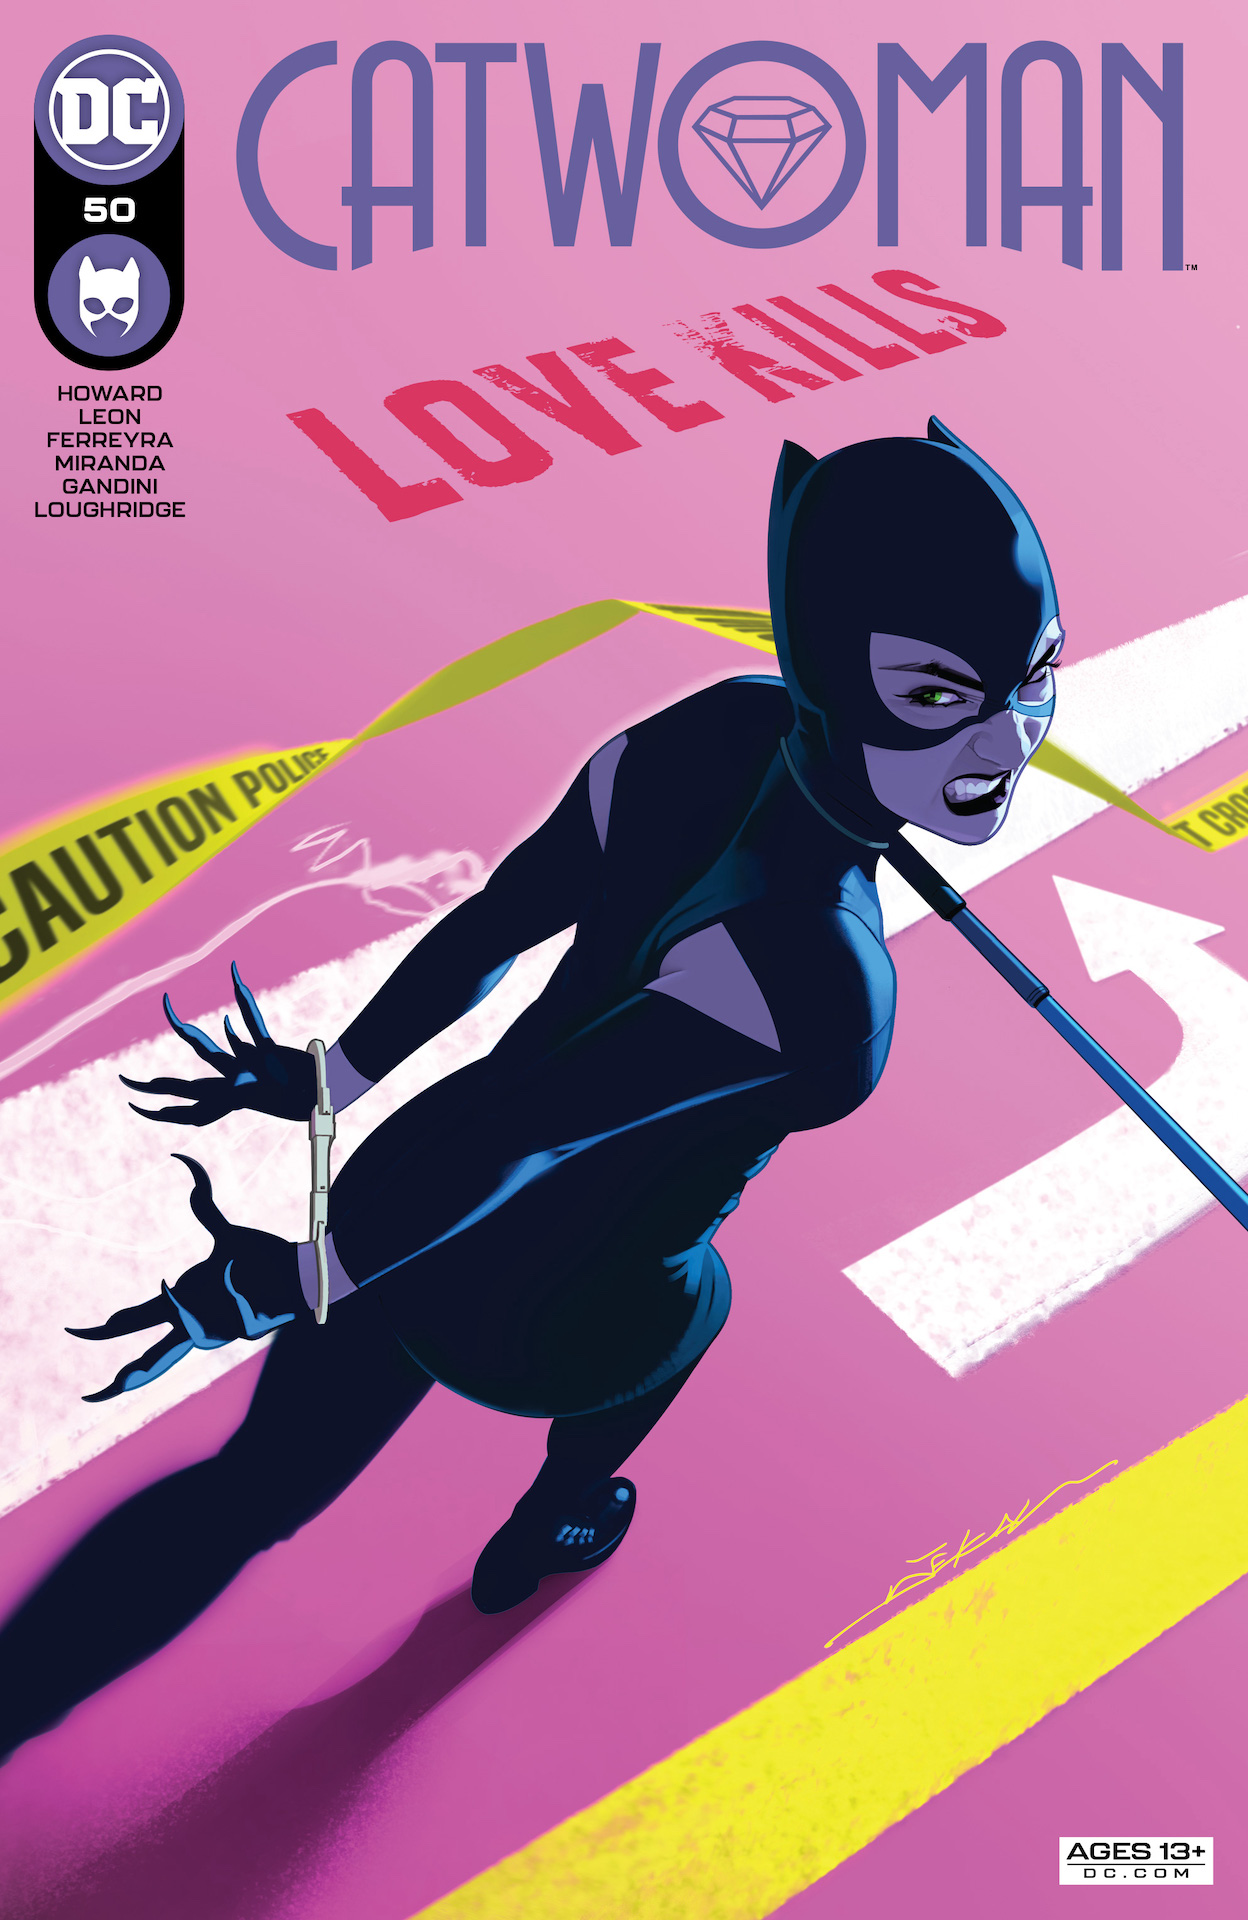 DC Preview: Catwoman #50